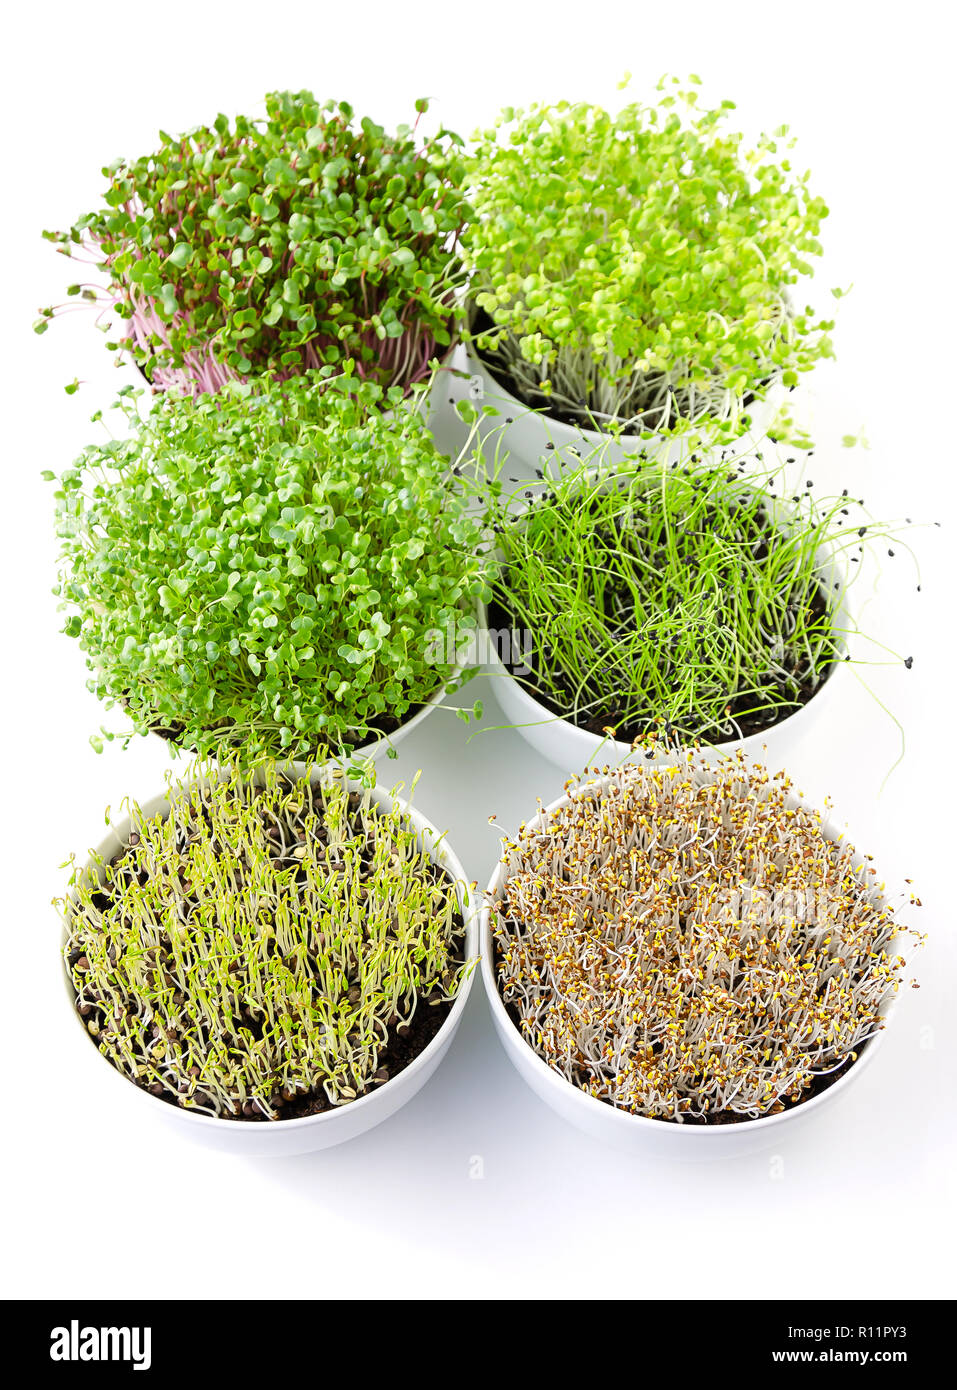 Six microgreens in white bowls, vertical. Sprouting shoots of radish, Chinese cabbage, kale, garlic, lentils and alfalfa in potting compost. Stock Photo